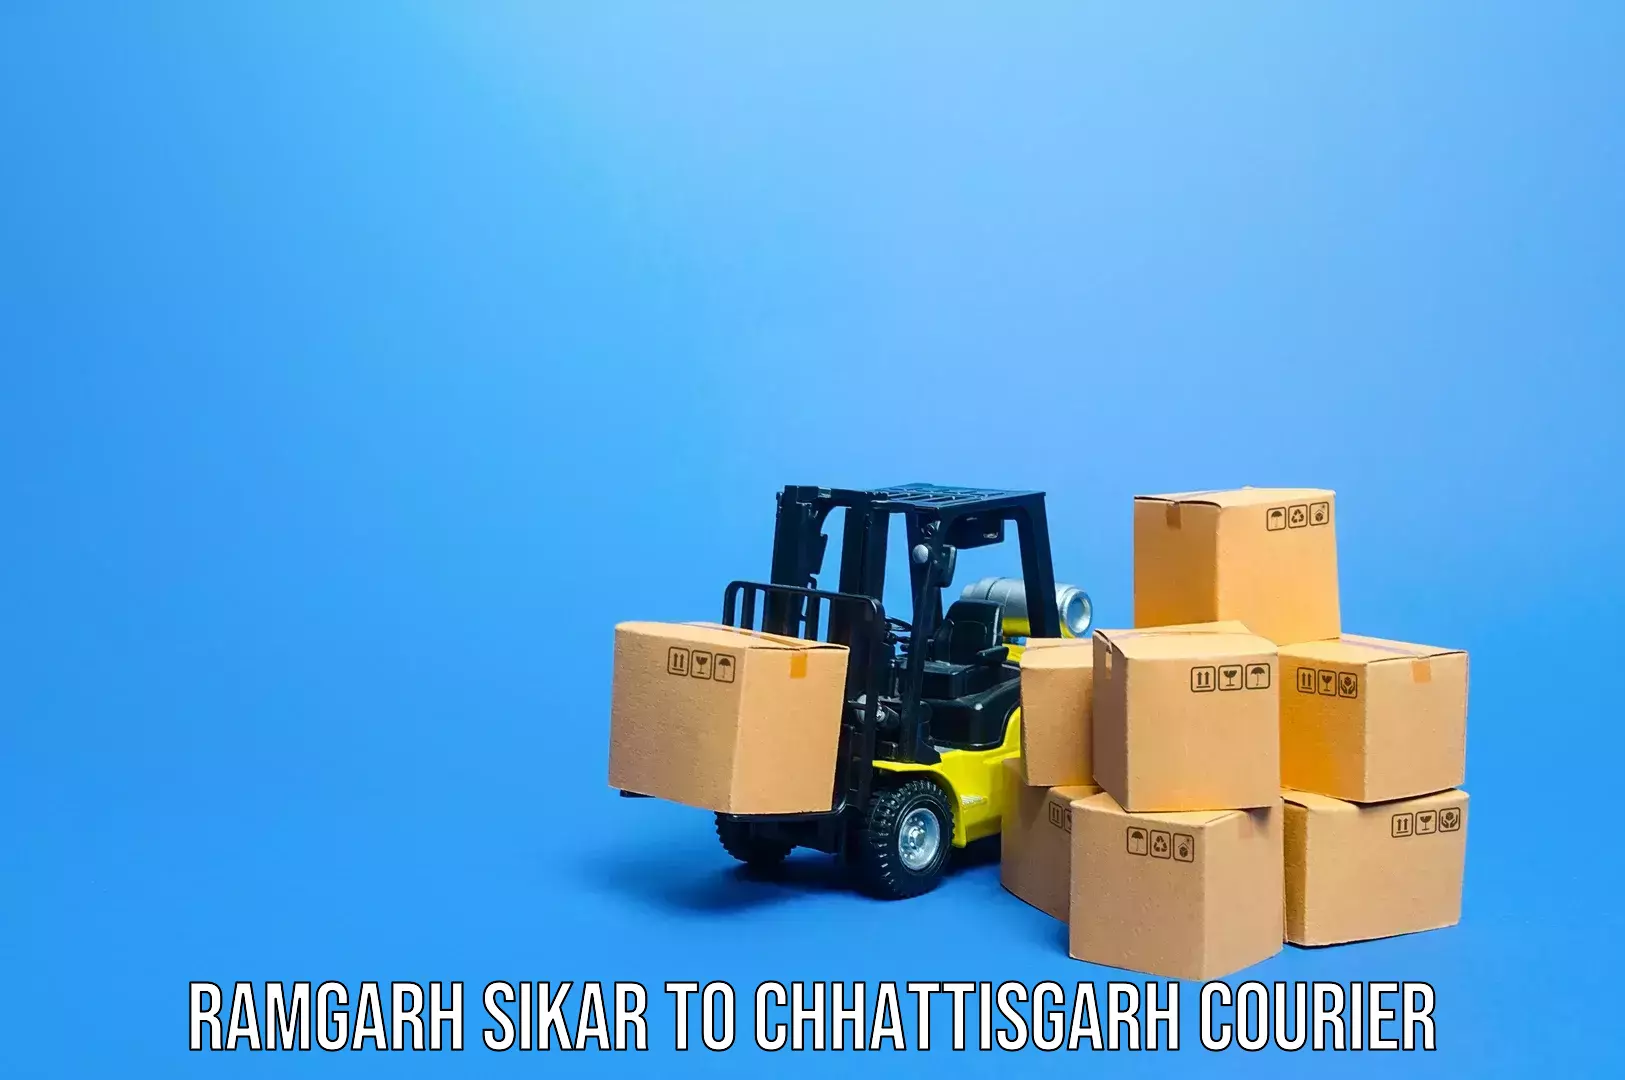 Luggage delivery news Ramgarh Sikar to Surguja